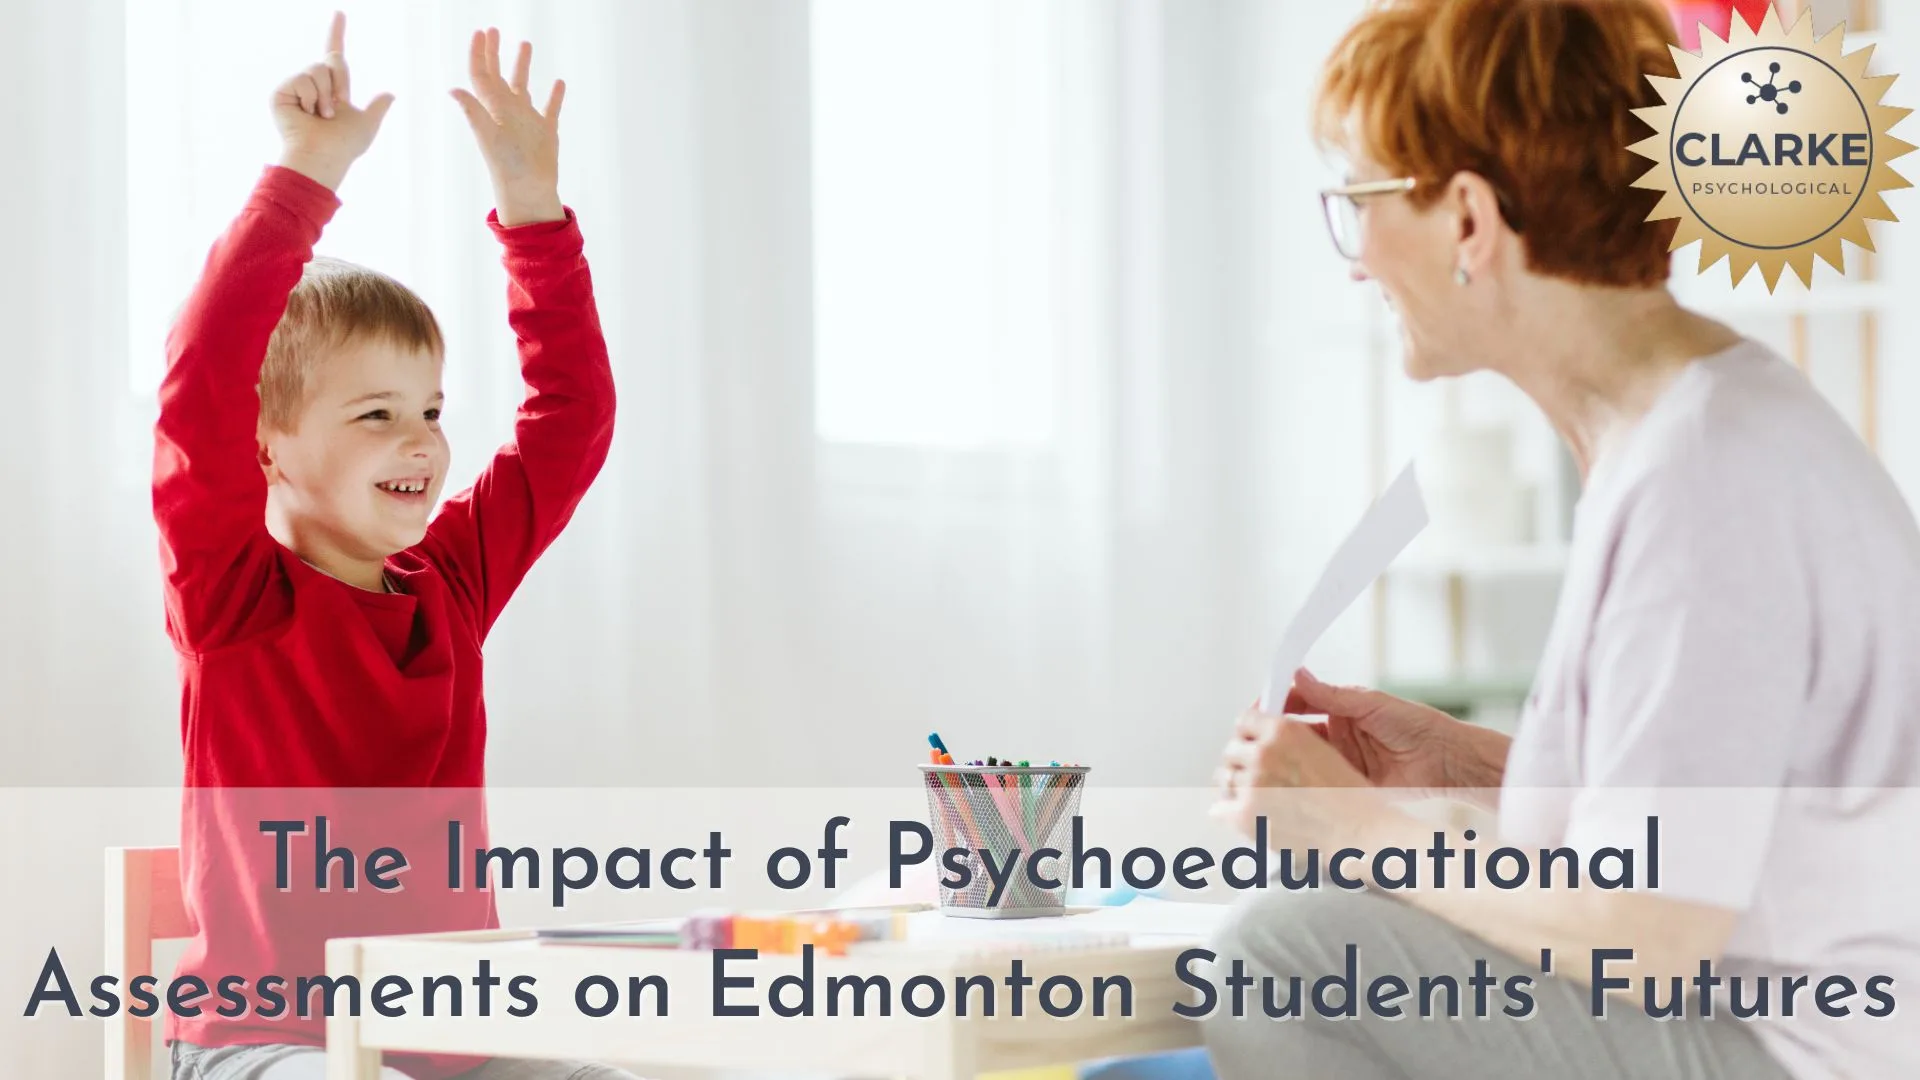 The Impact of Psychoeducational Assessments on Edmonton Students' Futures